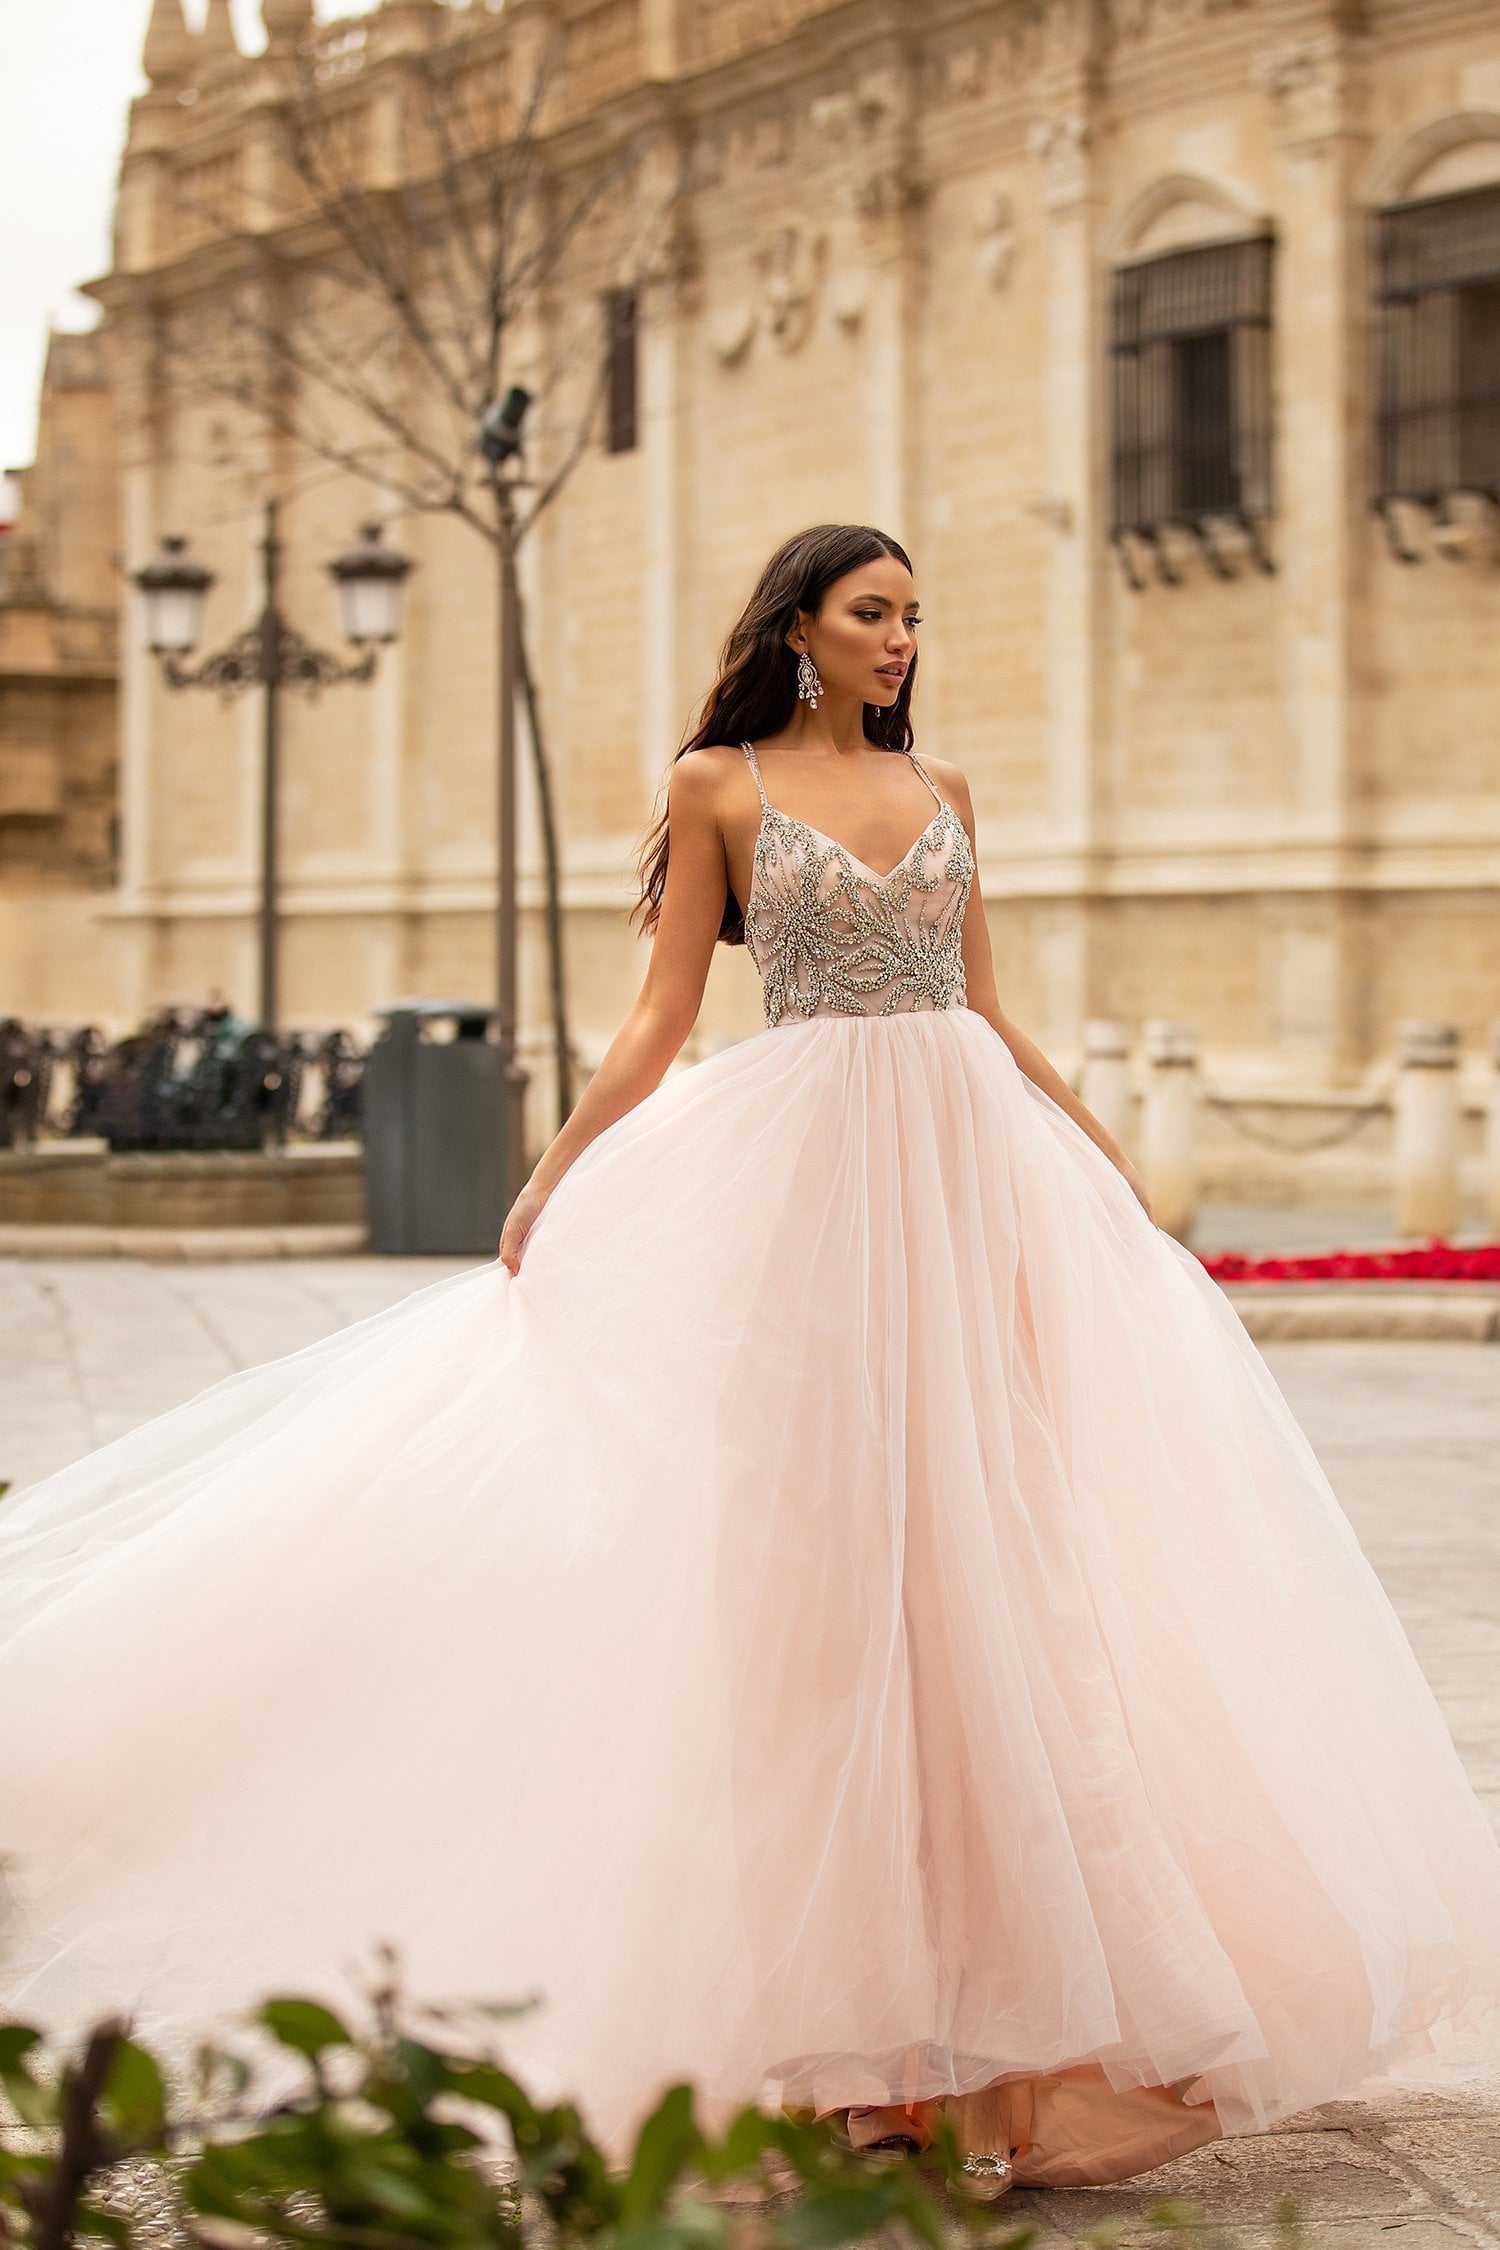 Litzy Beaded Tulle Gown - Baby Pink